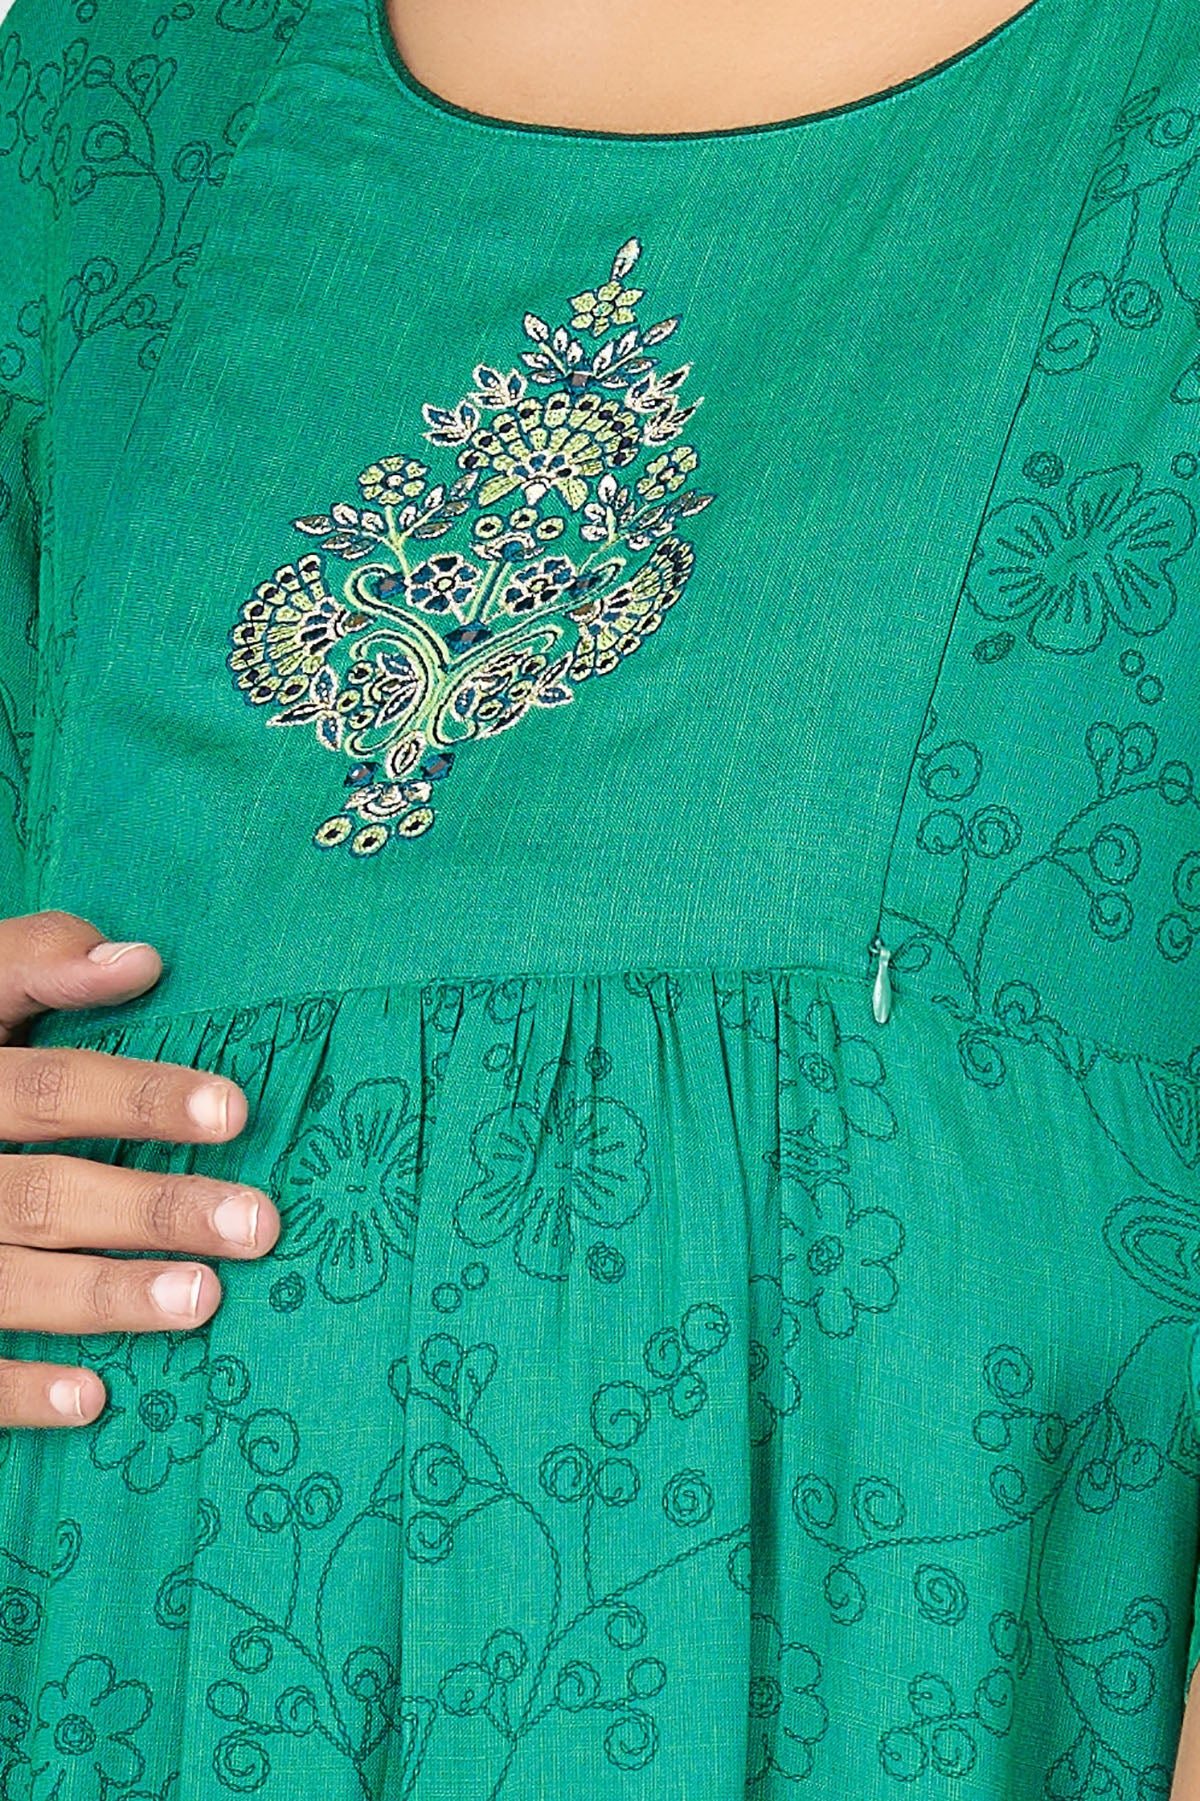 Floral Printed & Mirror Embroidered Women's Maternity Kurta - Green